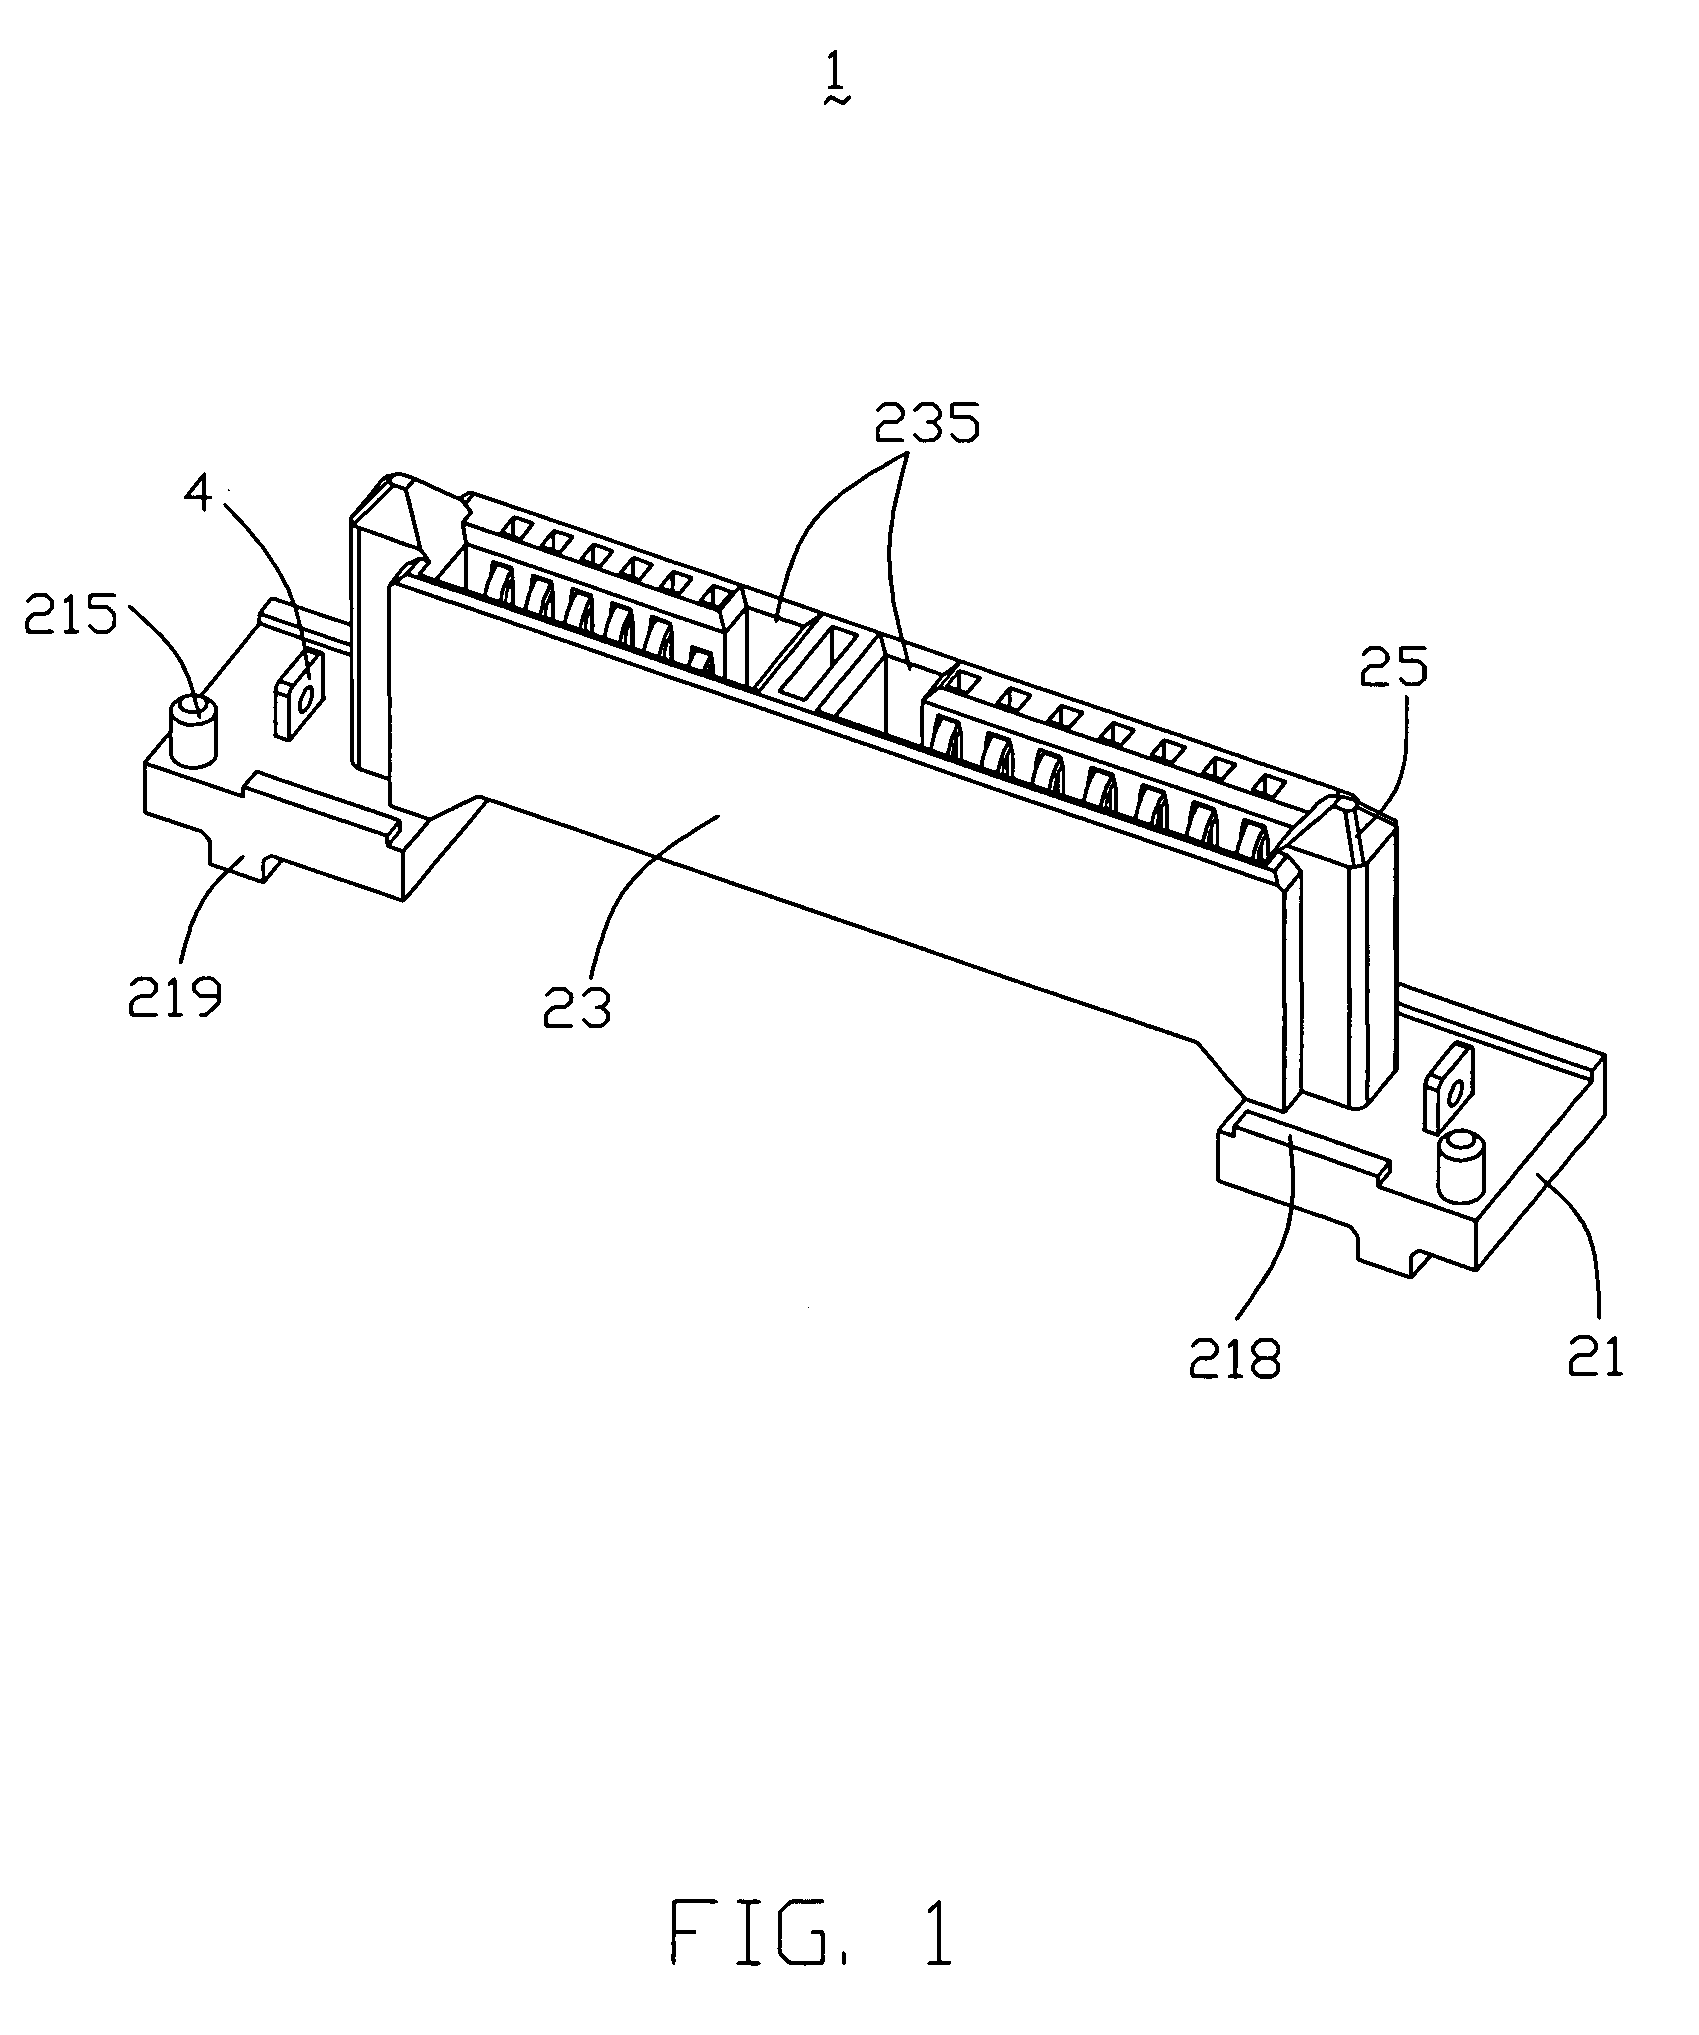 Electrical connector having low broad mounting profile